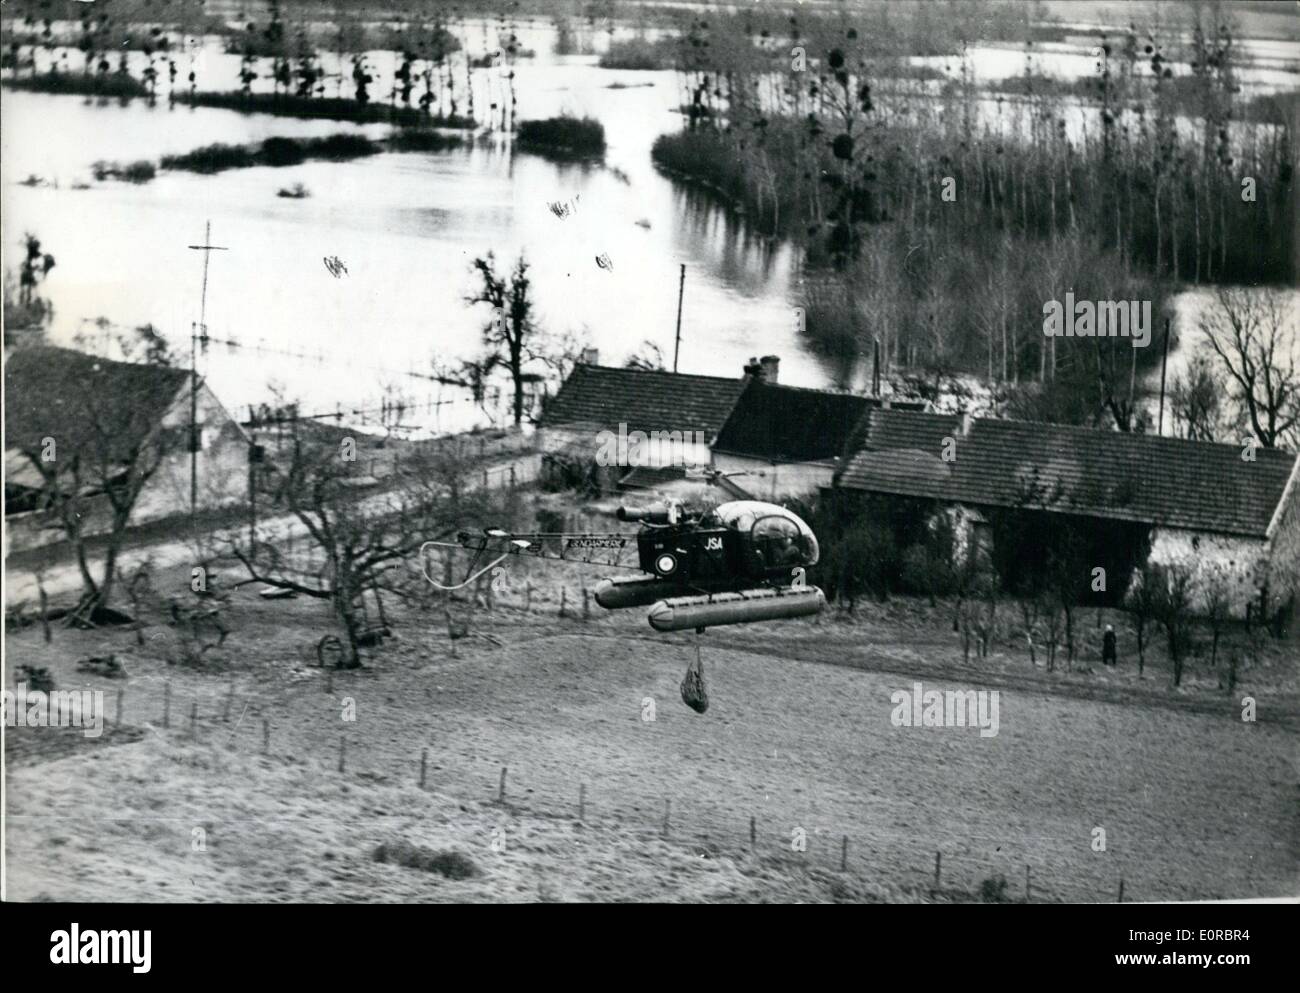 Jan. 01, 1959 - Copter brings food to victims of floods: At Bray Seine, in the flooded area of Montereau, police helicopters are supplying food to flooded farms. Photo shows helicopter lowering mail and food to flooded farms. Stock Photo